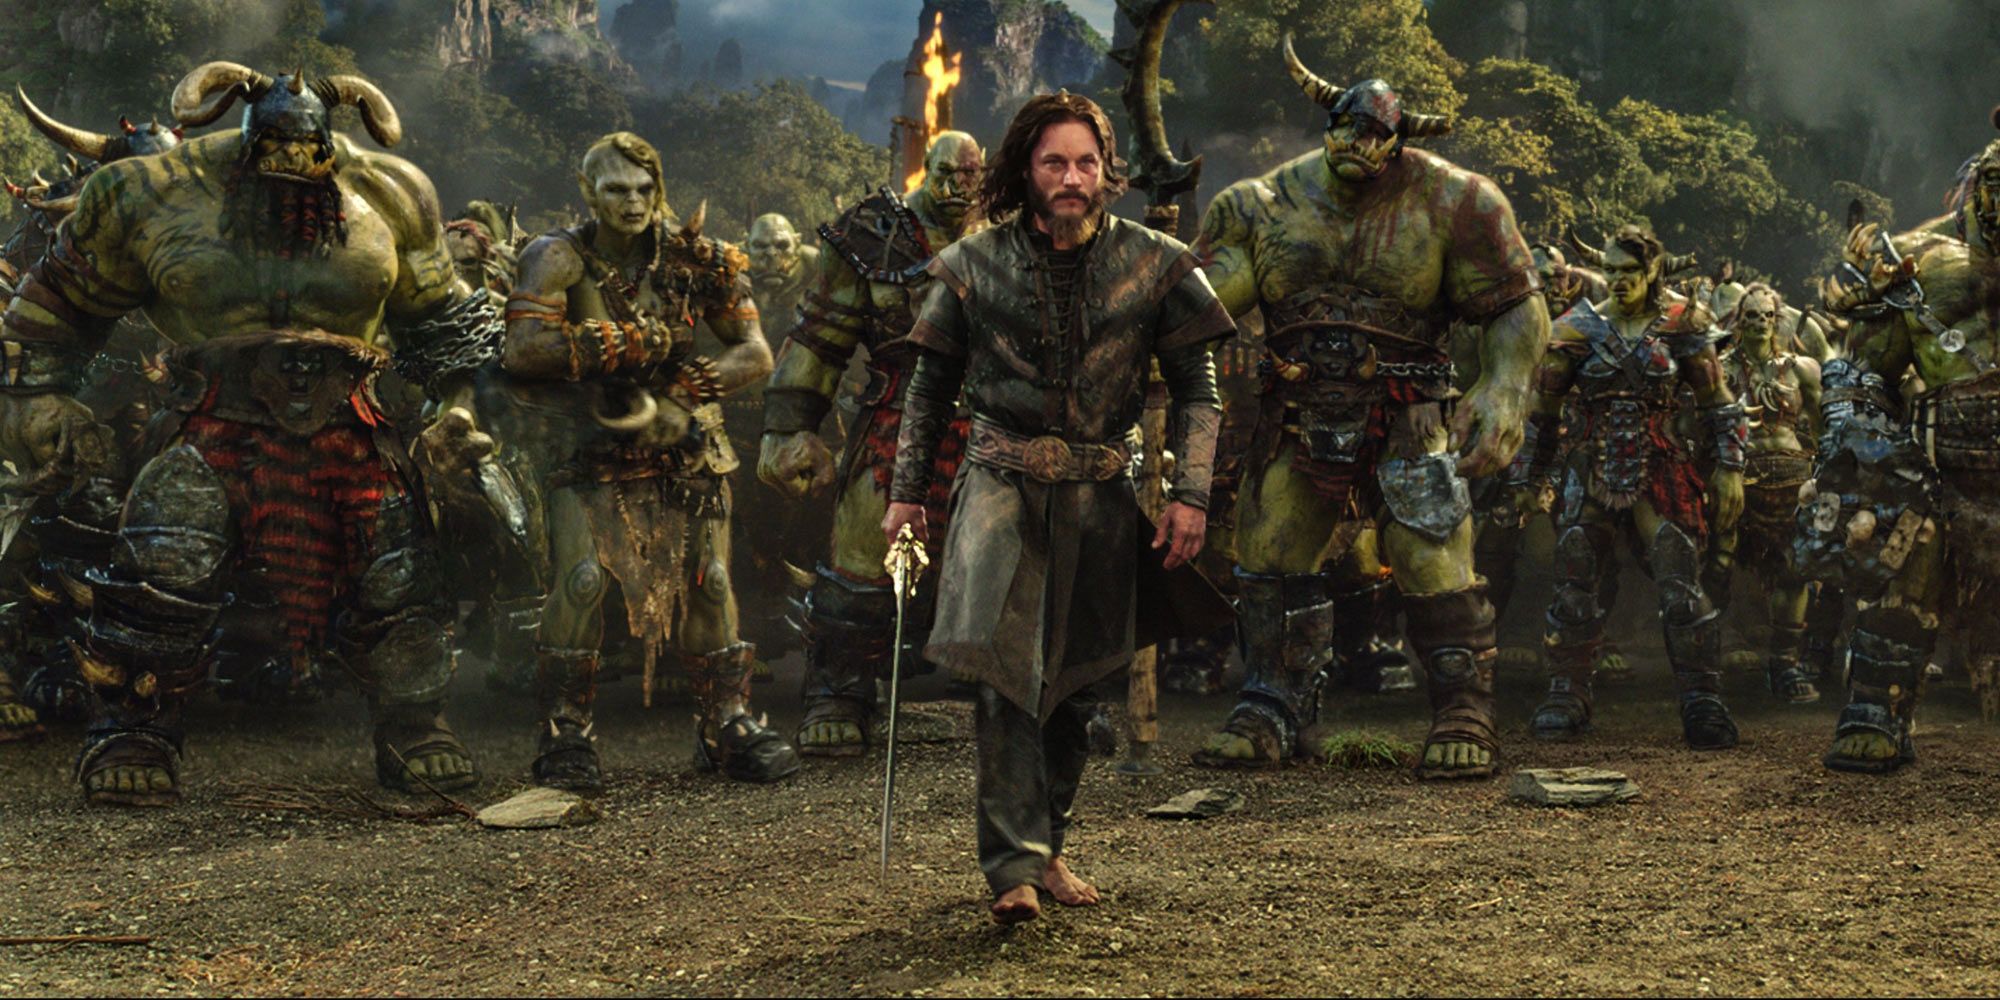 Anduin Wrynn leads a group of Orcs into battle in Warcraft